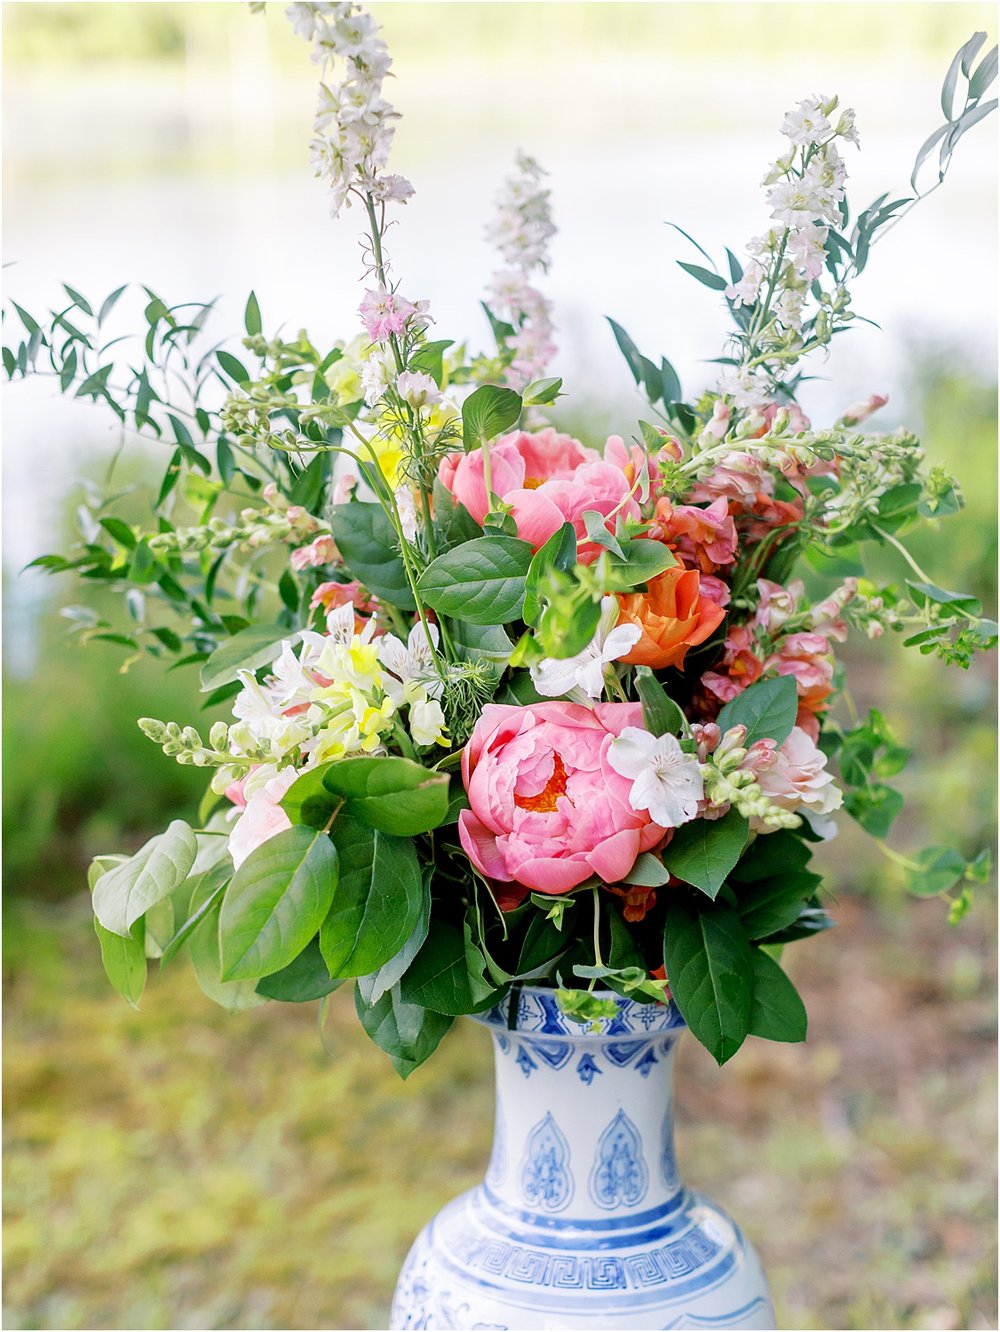 Blue and white vase with pink peonies floral arrangement